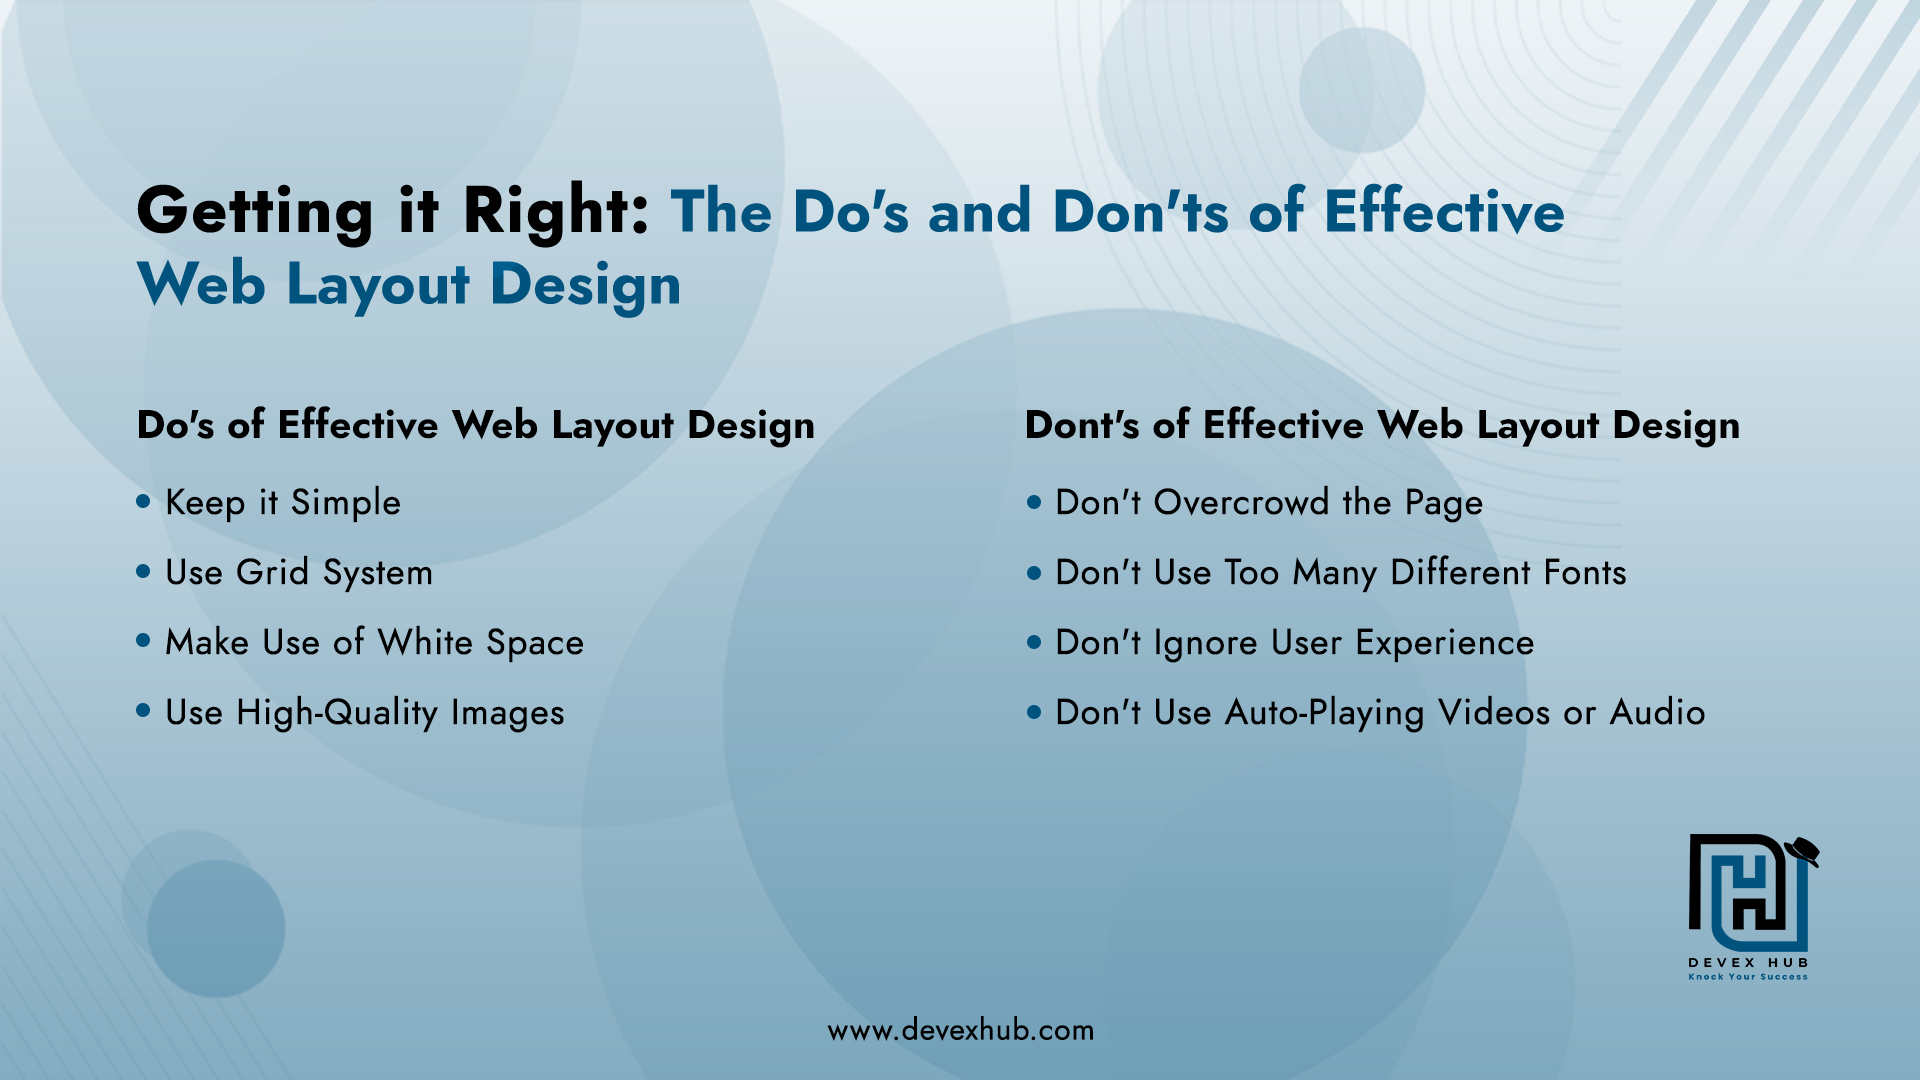 Getting it Right: The Do's and Don'ts of Effective Web Layout Design